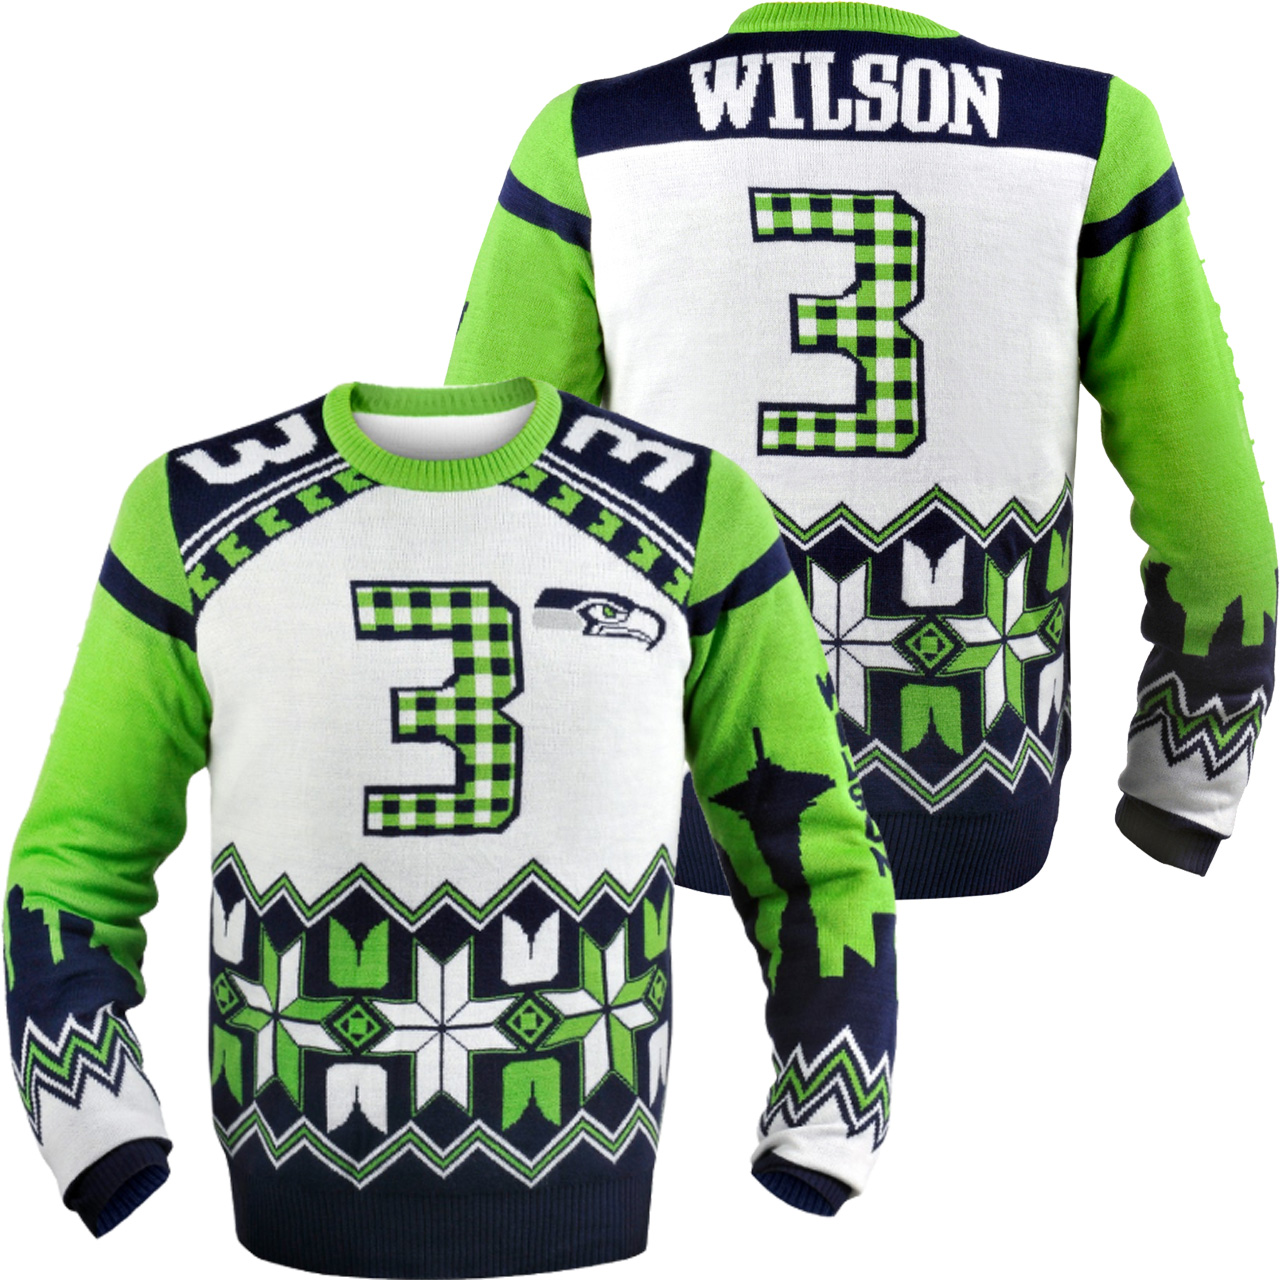 Russell Wilson #3 Seattle Seahawks NFL Ugly Player Sweater